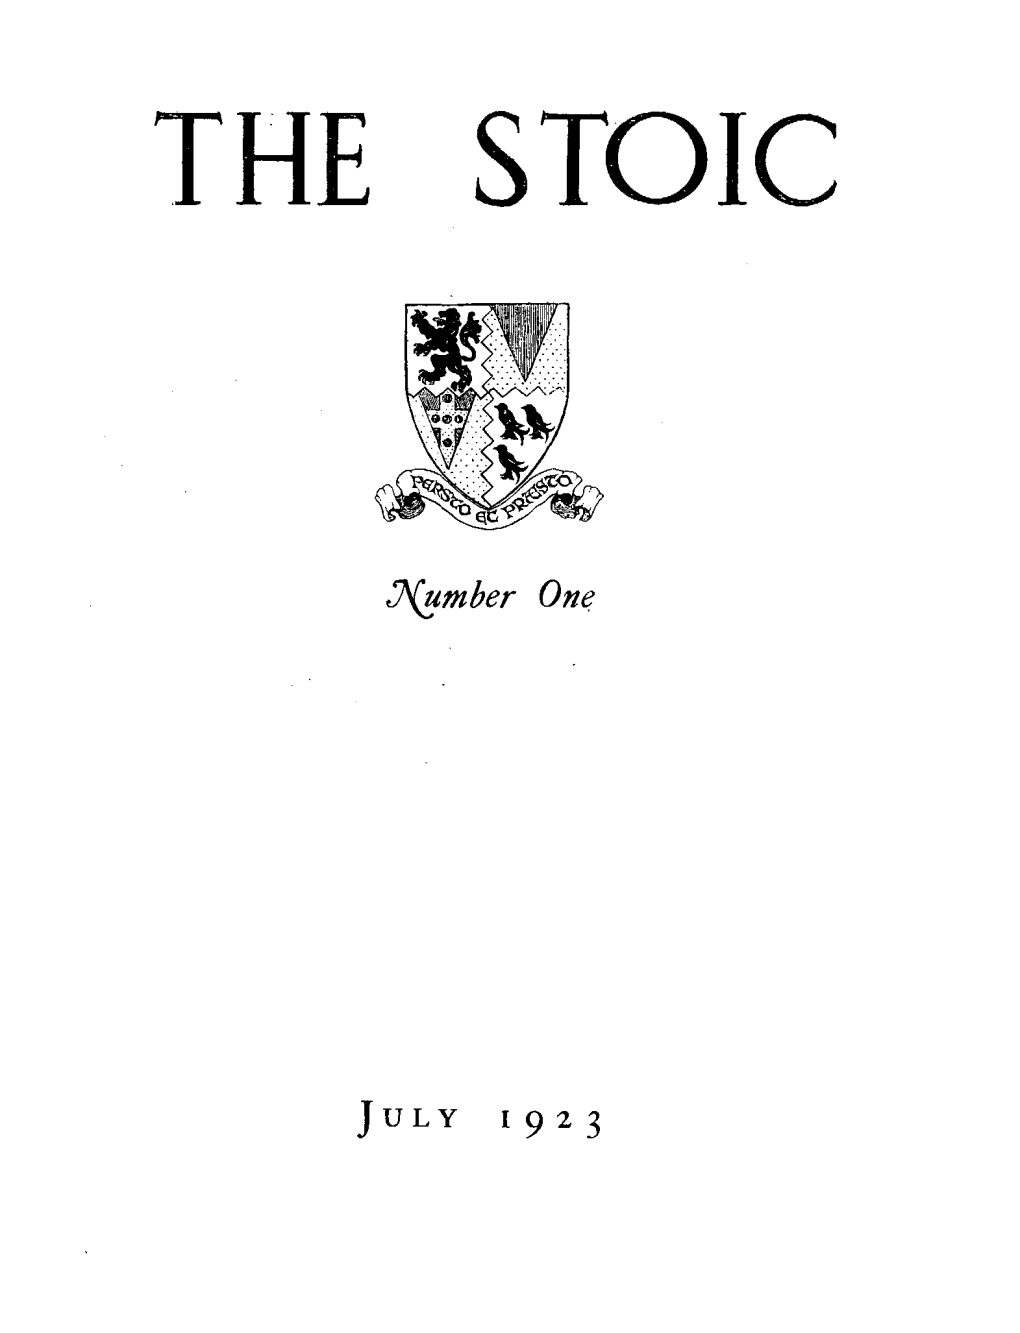 JX!Fmber Om: the STOIC